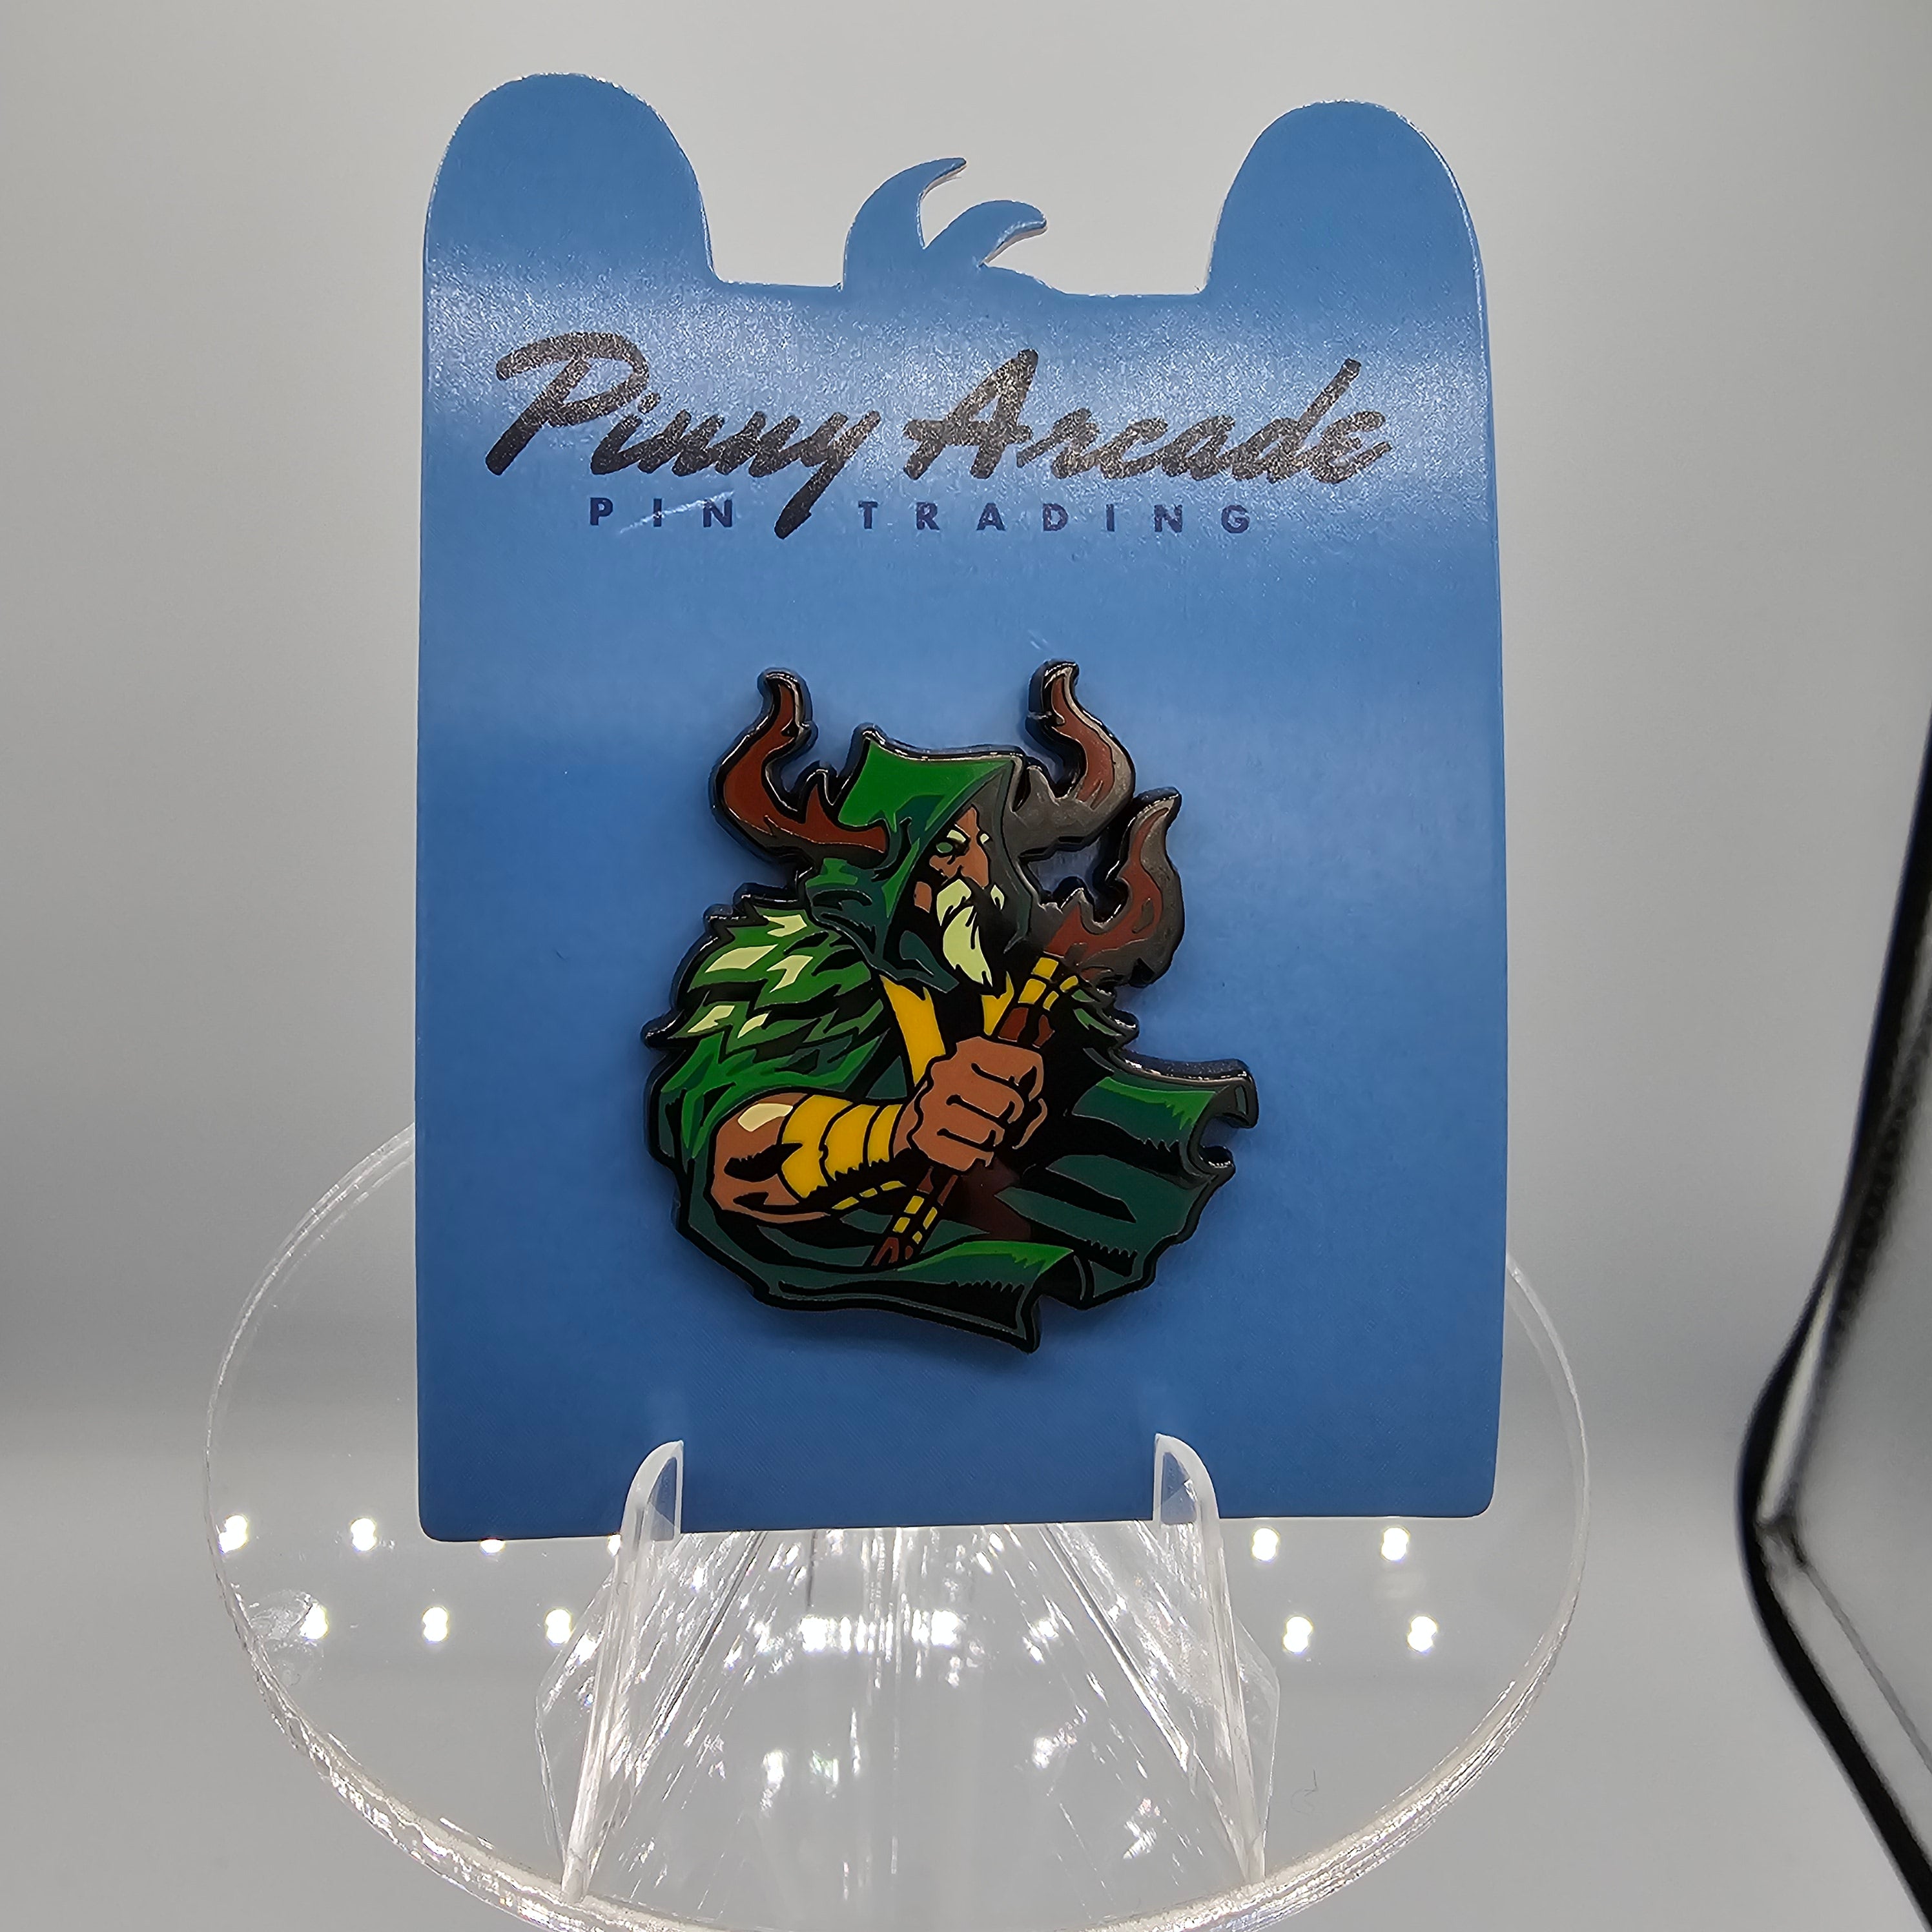 Penny Arcade Pins - Glynnmoore the Founder